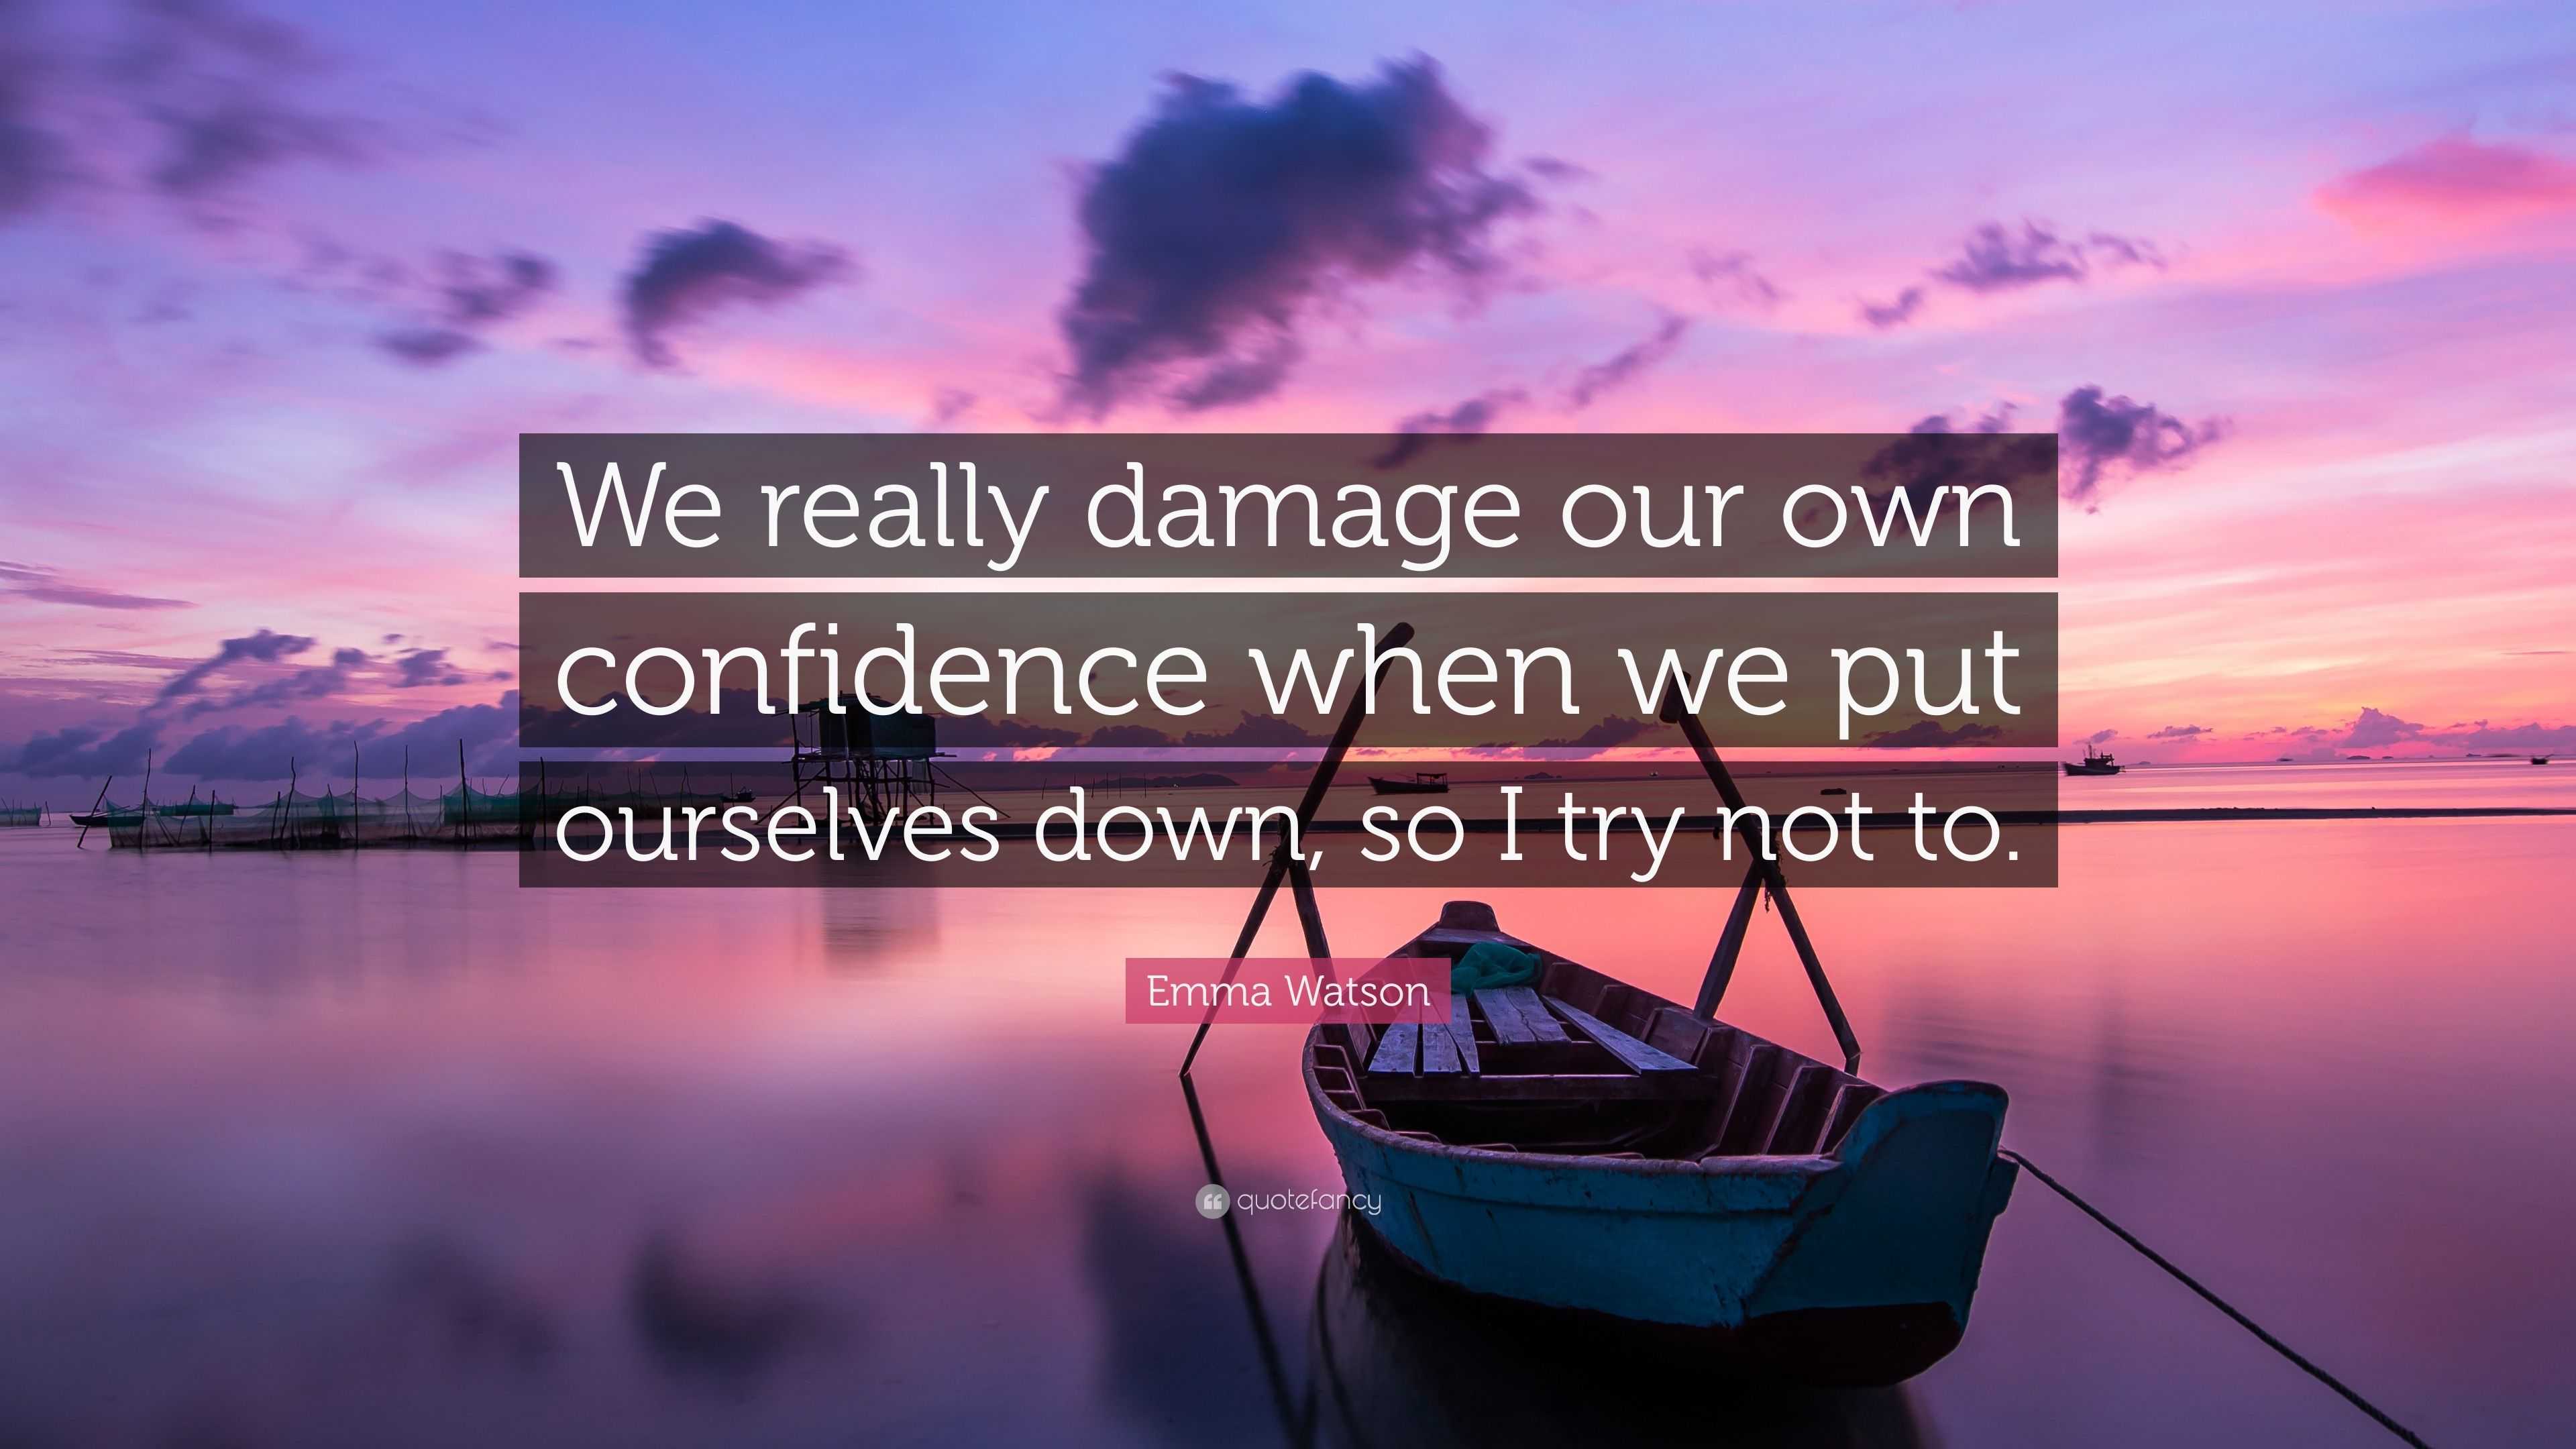 Emma Watson Quote: "We really damage our own confidence when we put ourselves down, so I try not ...